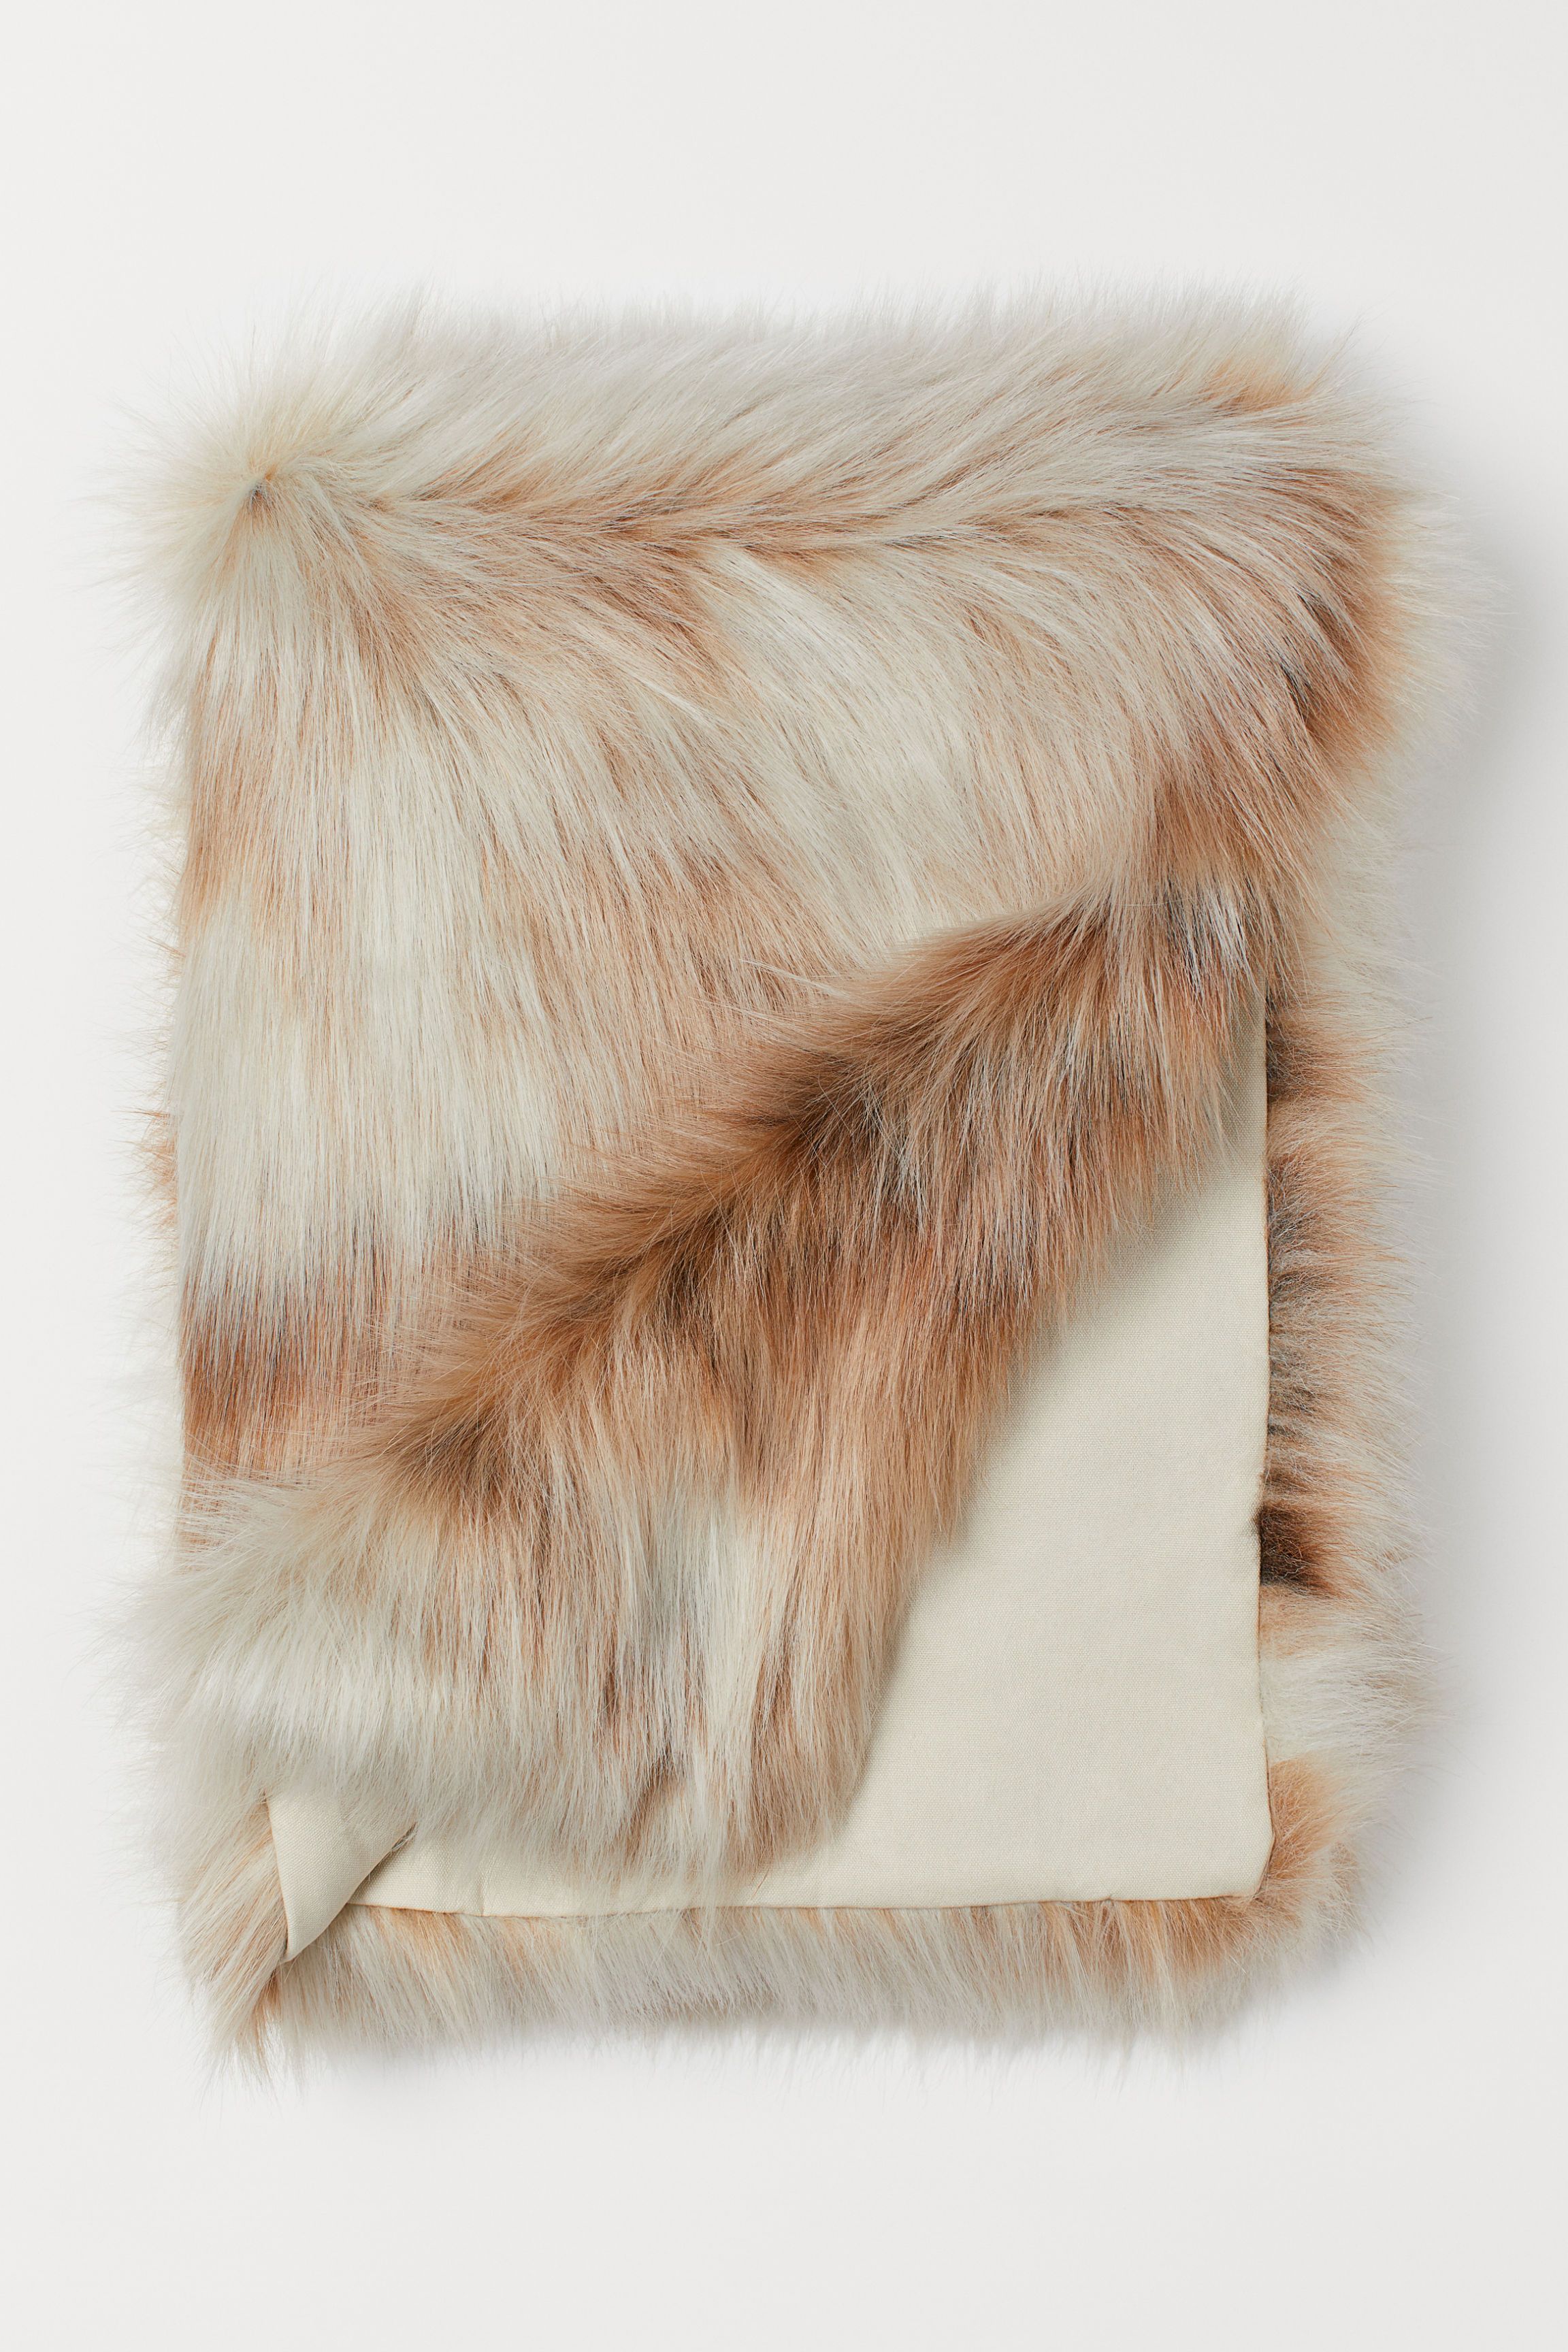 10 Best Faux Fur Throw Blankets for 2019 - Soft Faux Fur Throws